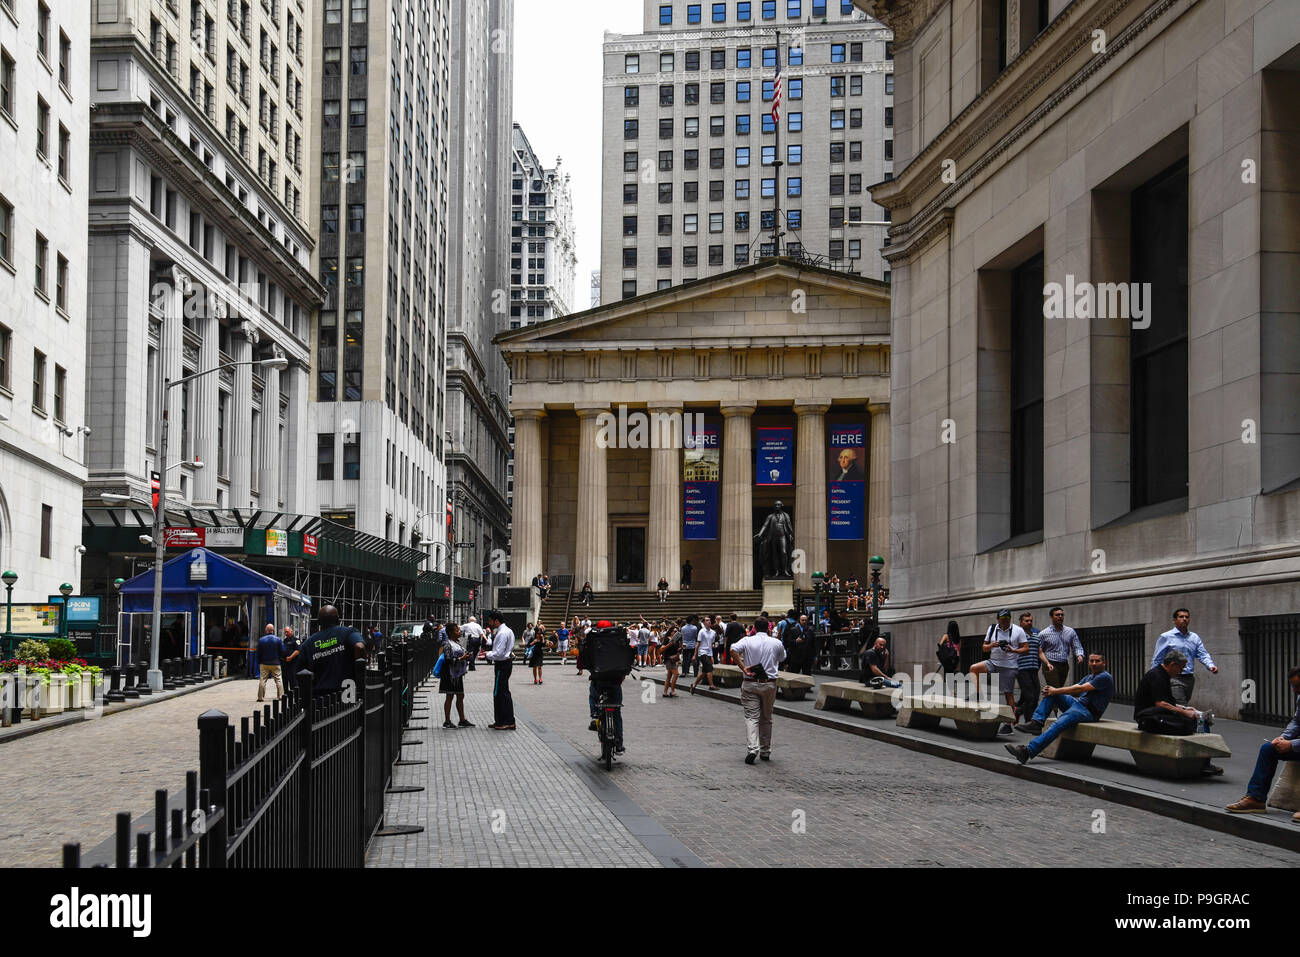 New York City, USA - June 20, 2018: Federal Hall National Memorial building from Broad Street in Financial District of NYC Stock Photo